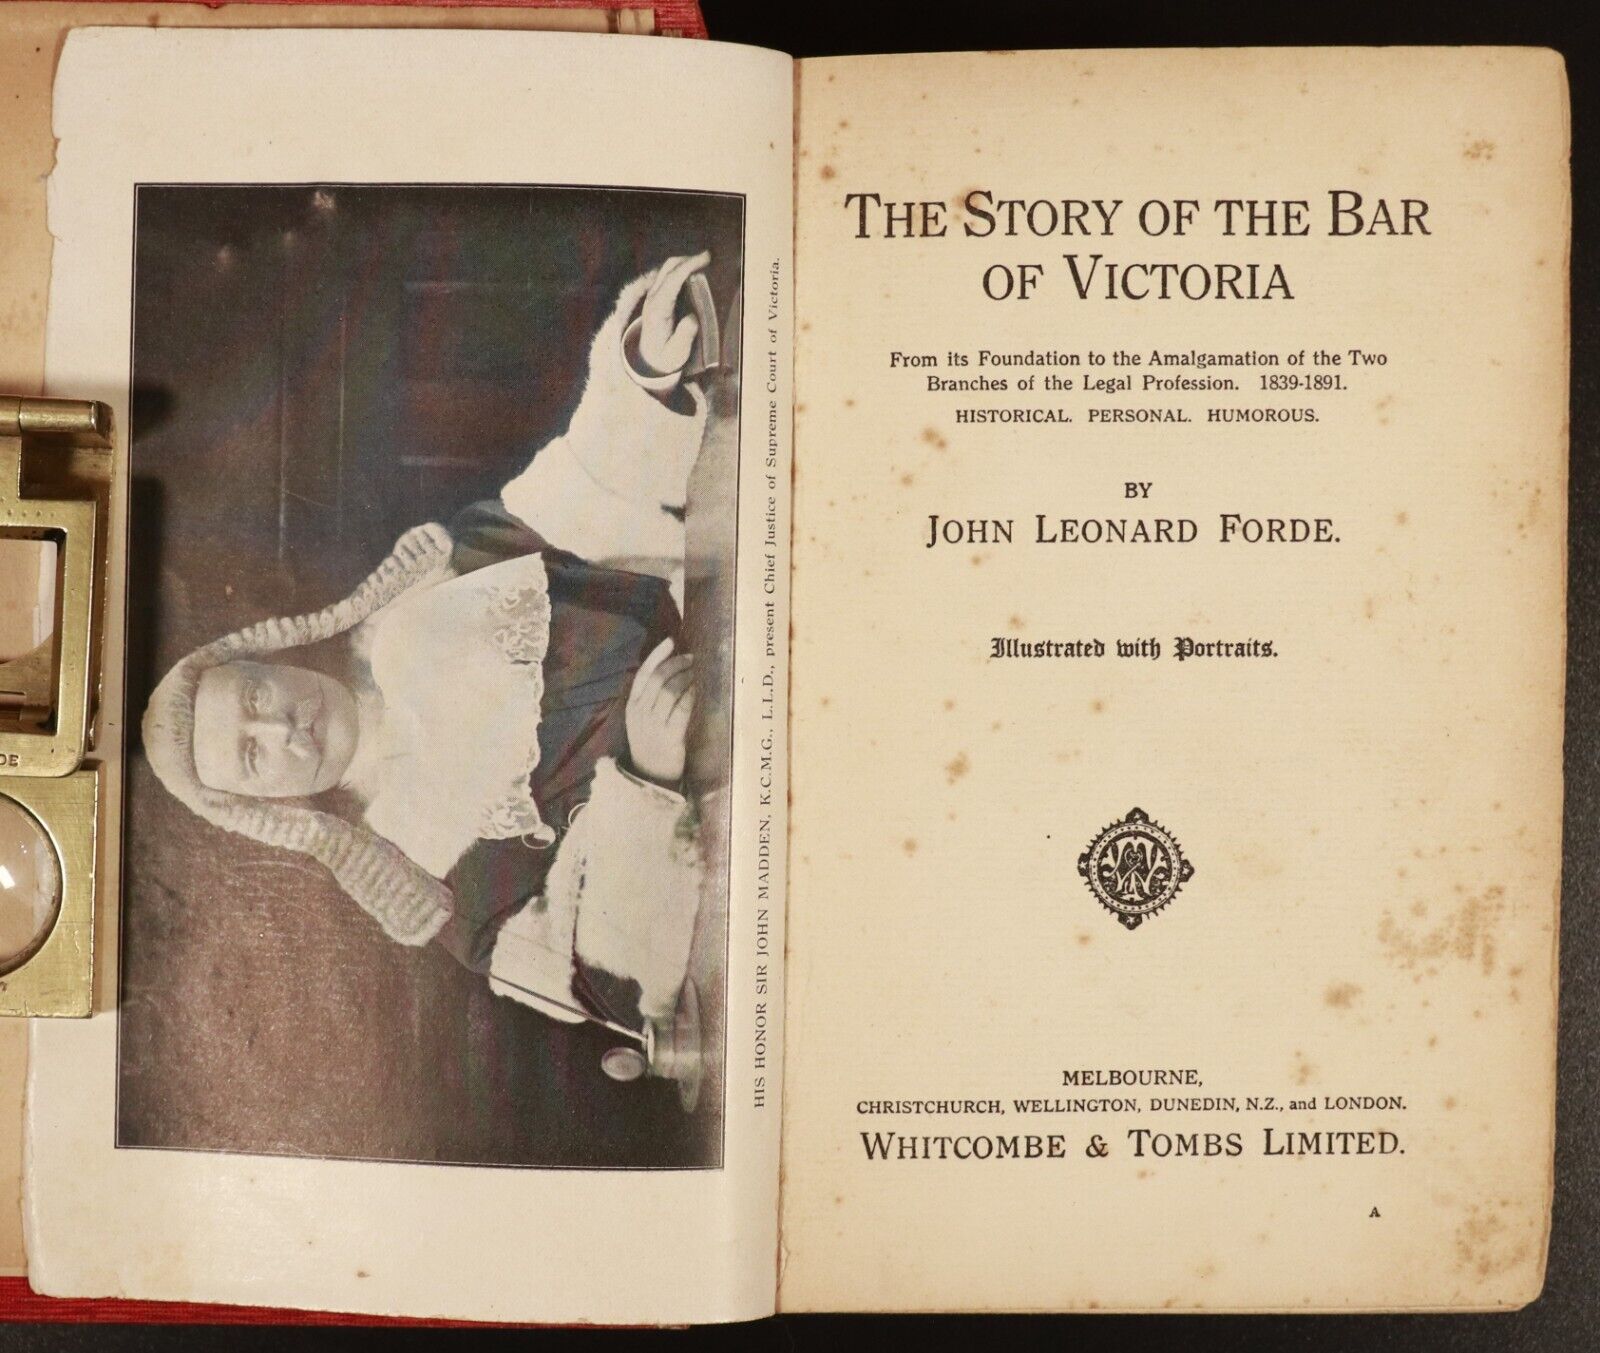 1910 Story Of The Bar Of Victoria Antique Australian Legal History Book JL Forde